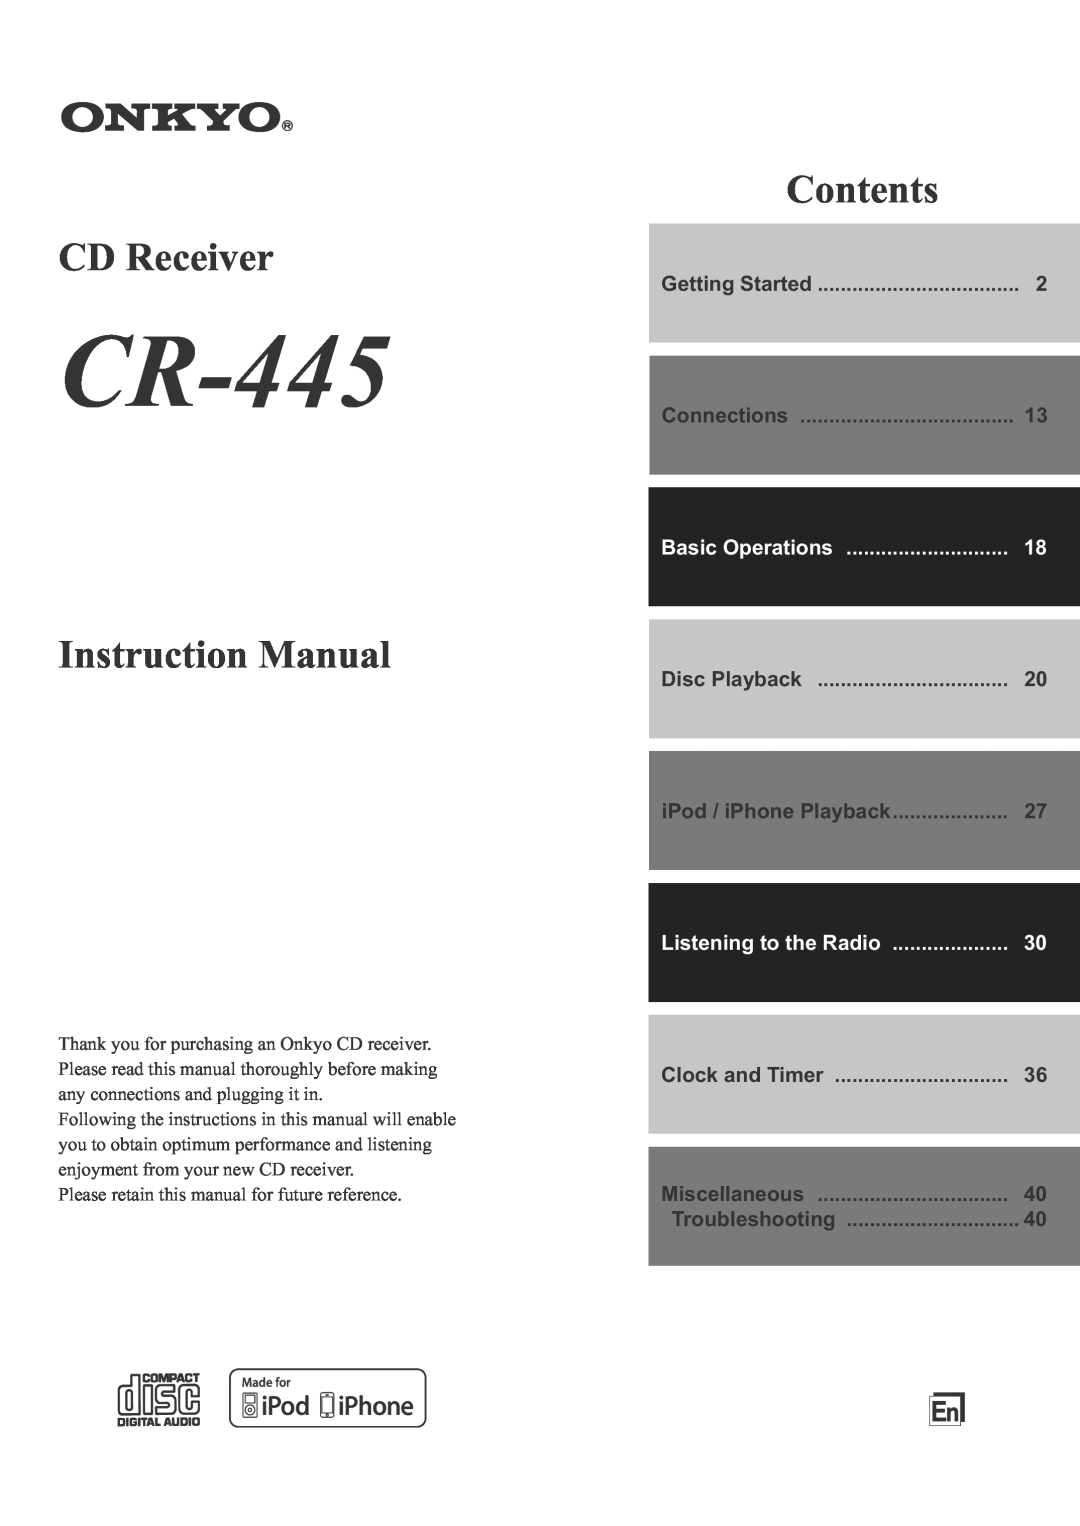 Onkyo CR-445 instruction manual Disc Playback, iPod / iPhone Playback, Miscellaneous, CD Receiver, Contents 